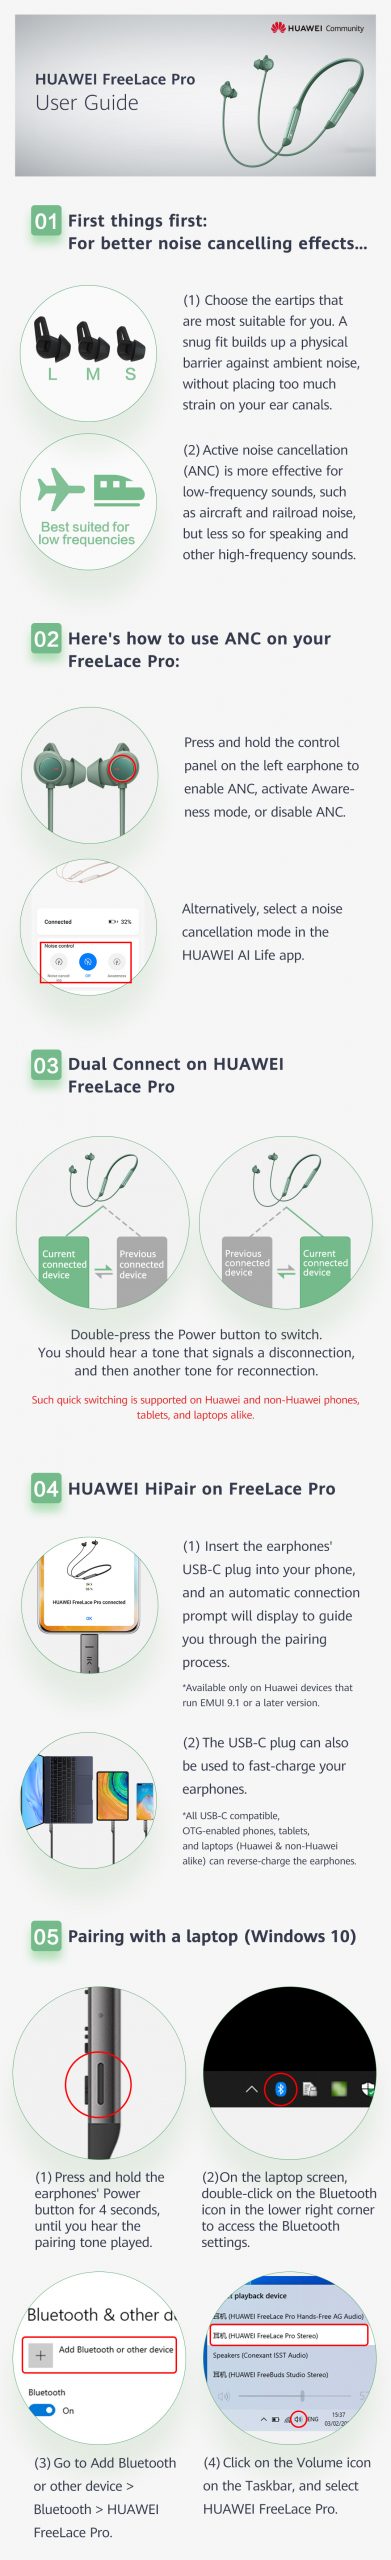 How to use FreeLace Pro